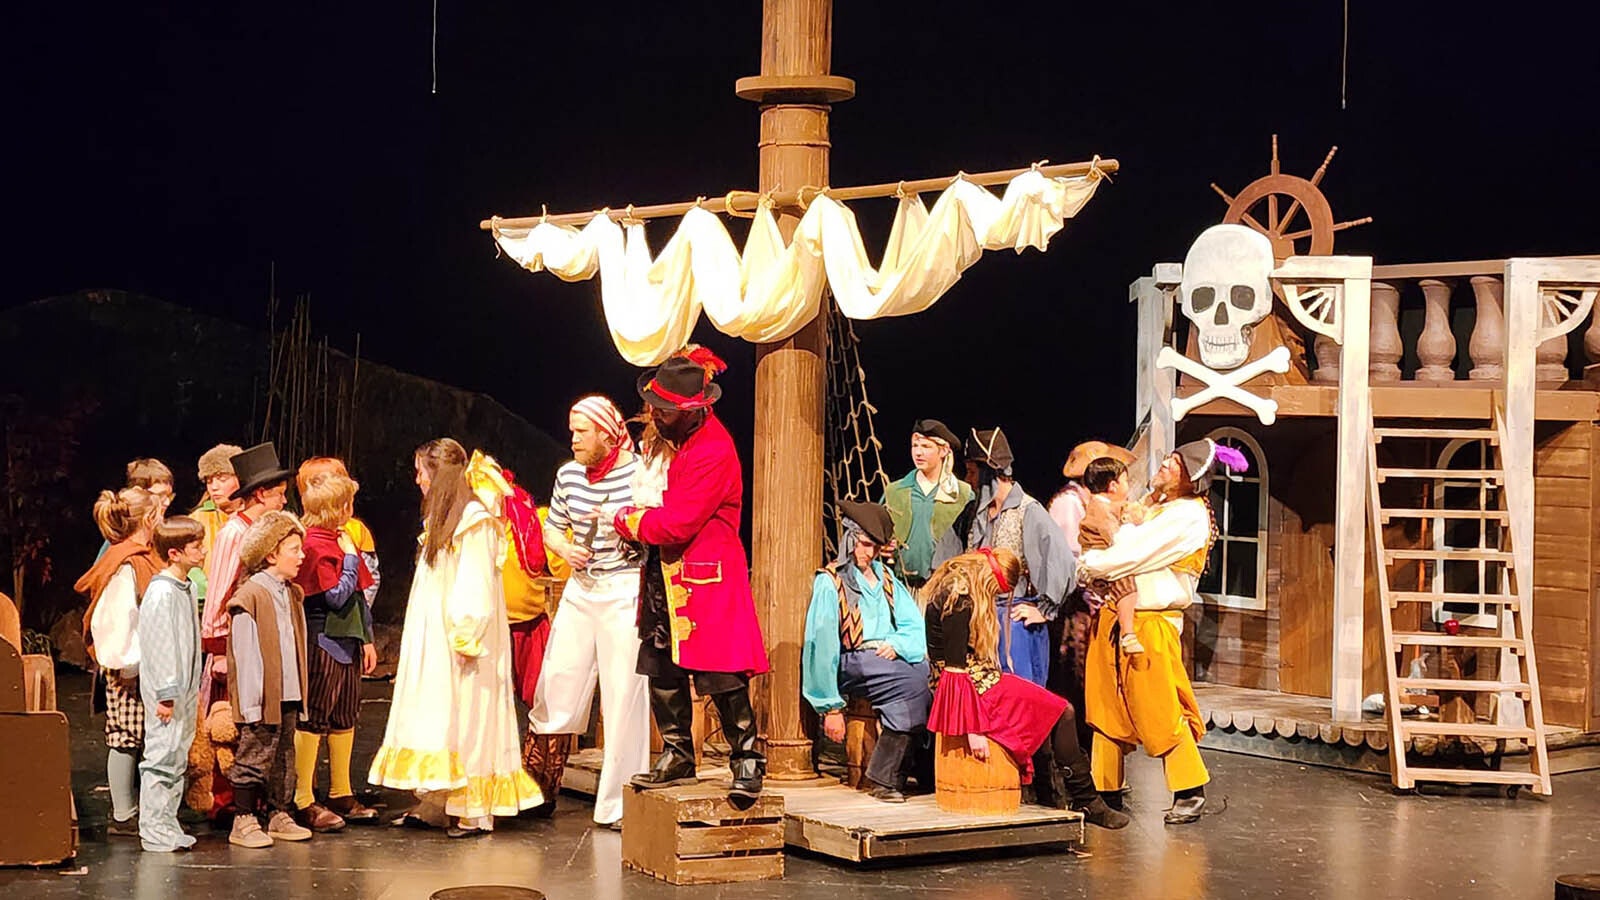 From the Central Wyoming College production of the musical "Peter Pan."